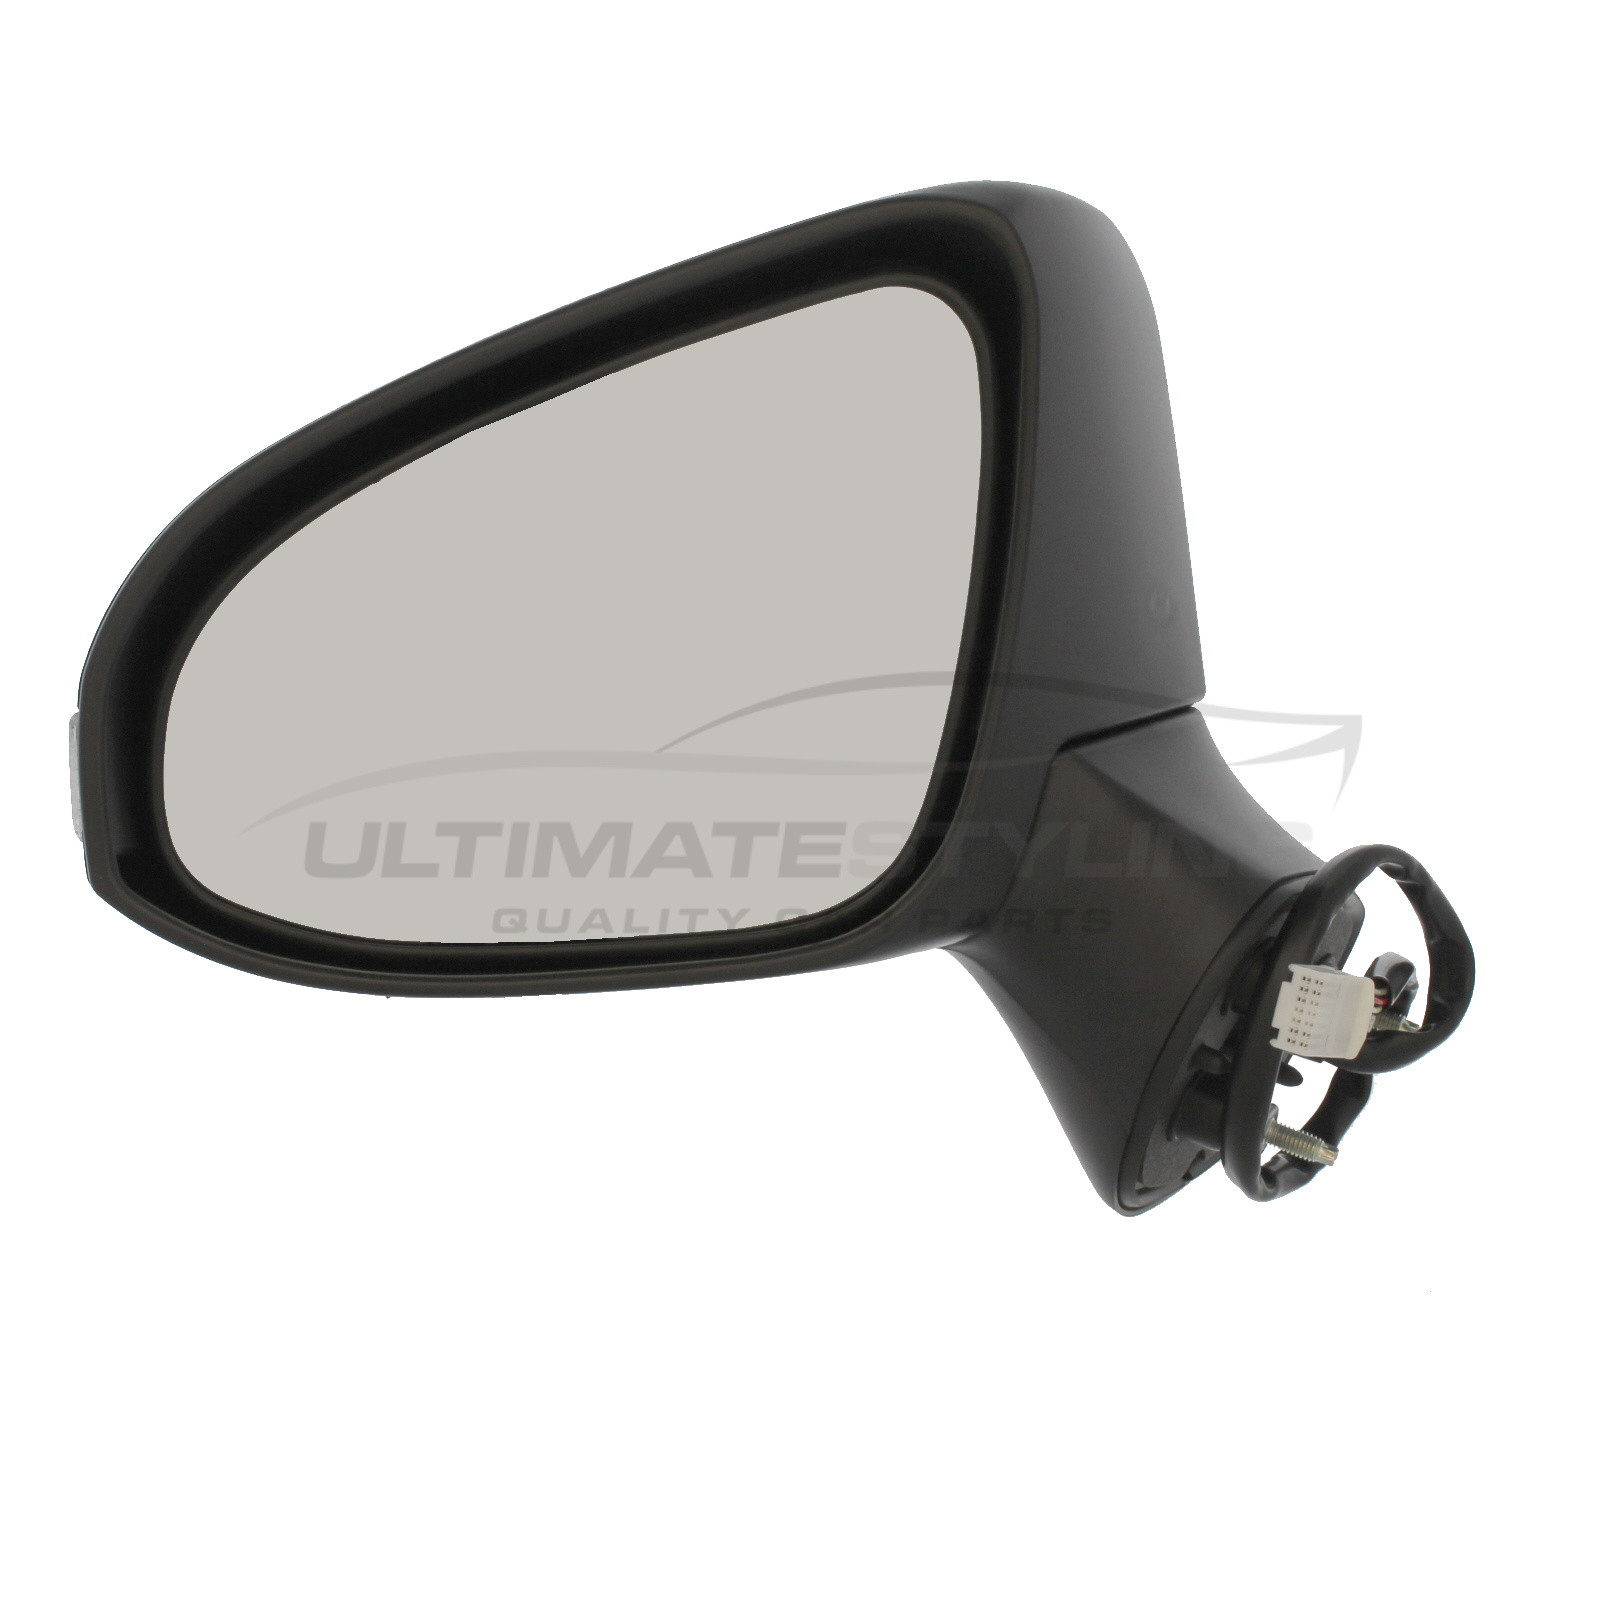 Toyota Avensis Wing Mirror / Door Mirror - Passenger Side (LH) - Electric  adjustment - Heated Glass - Power Folding - Indicator - Paintable - Black